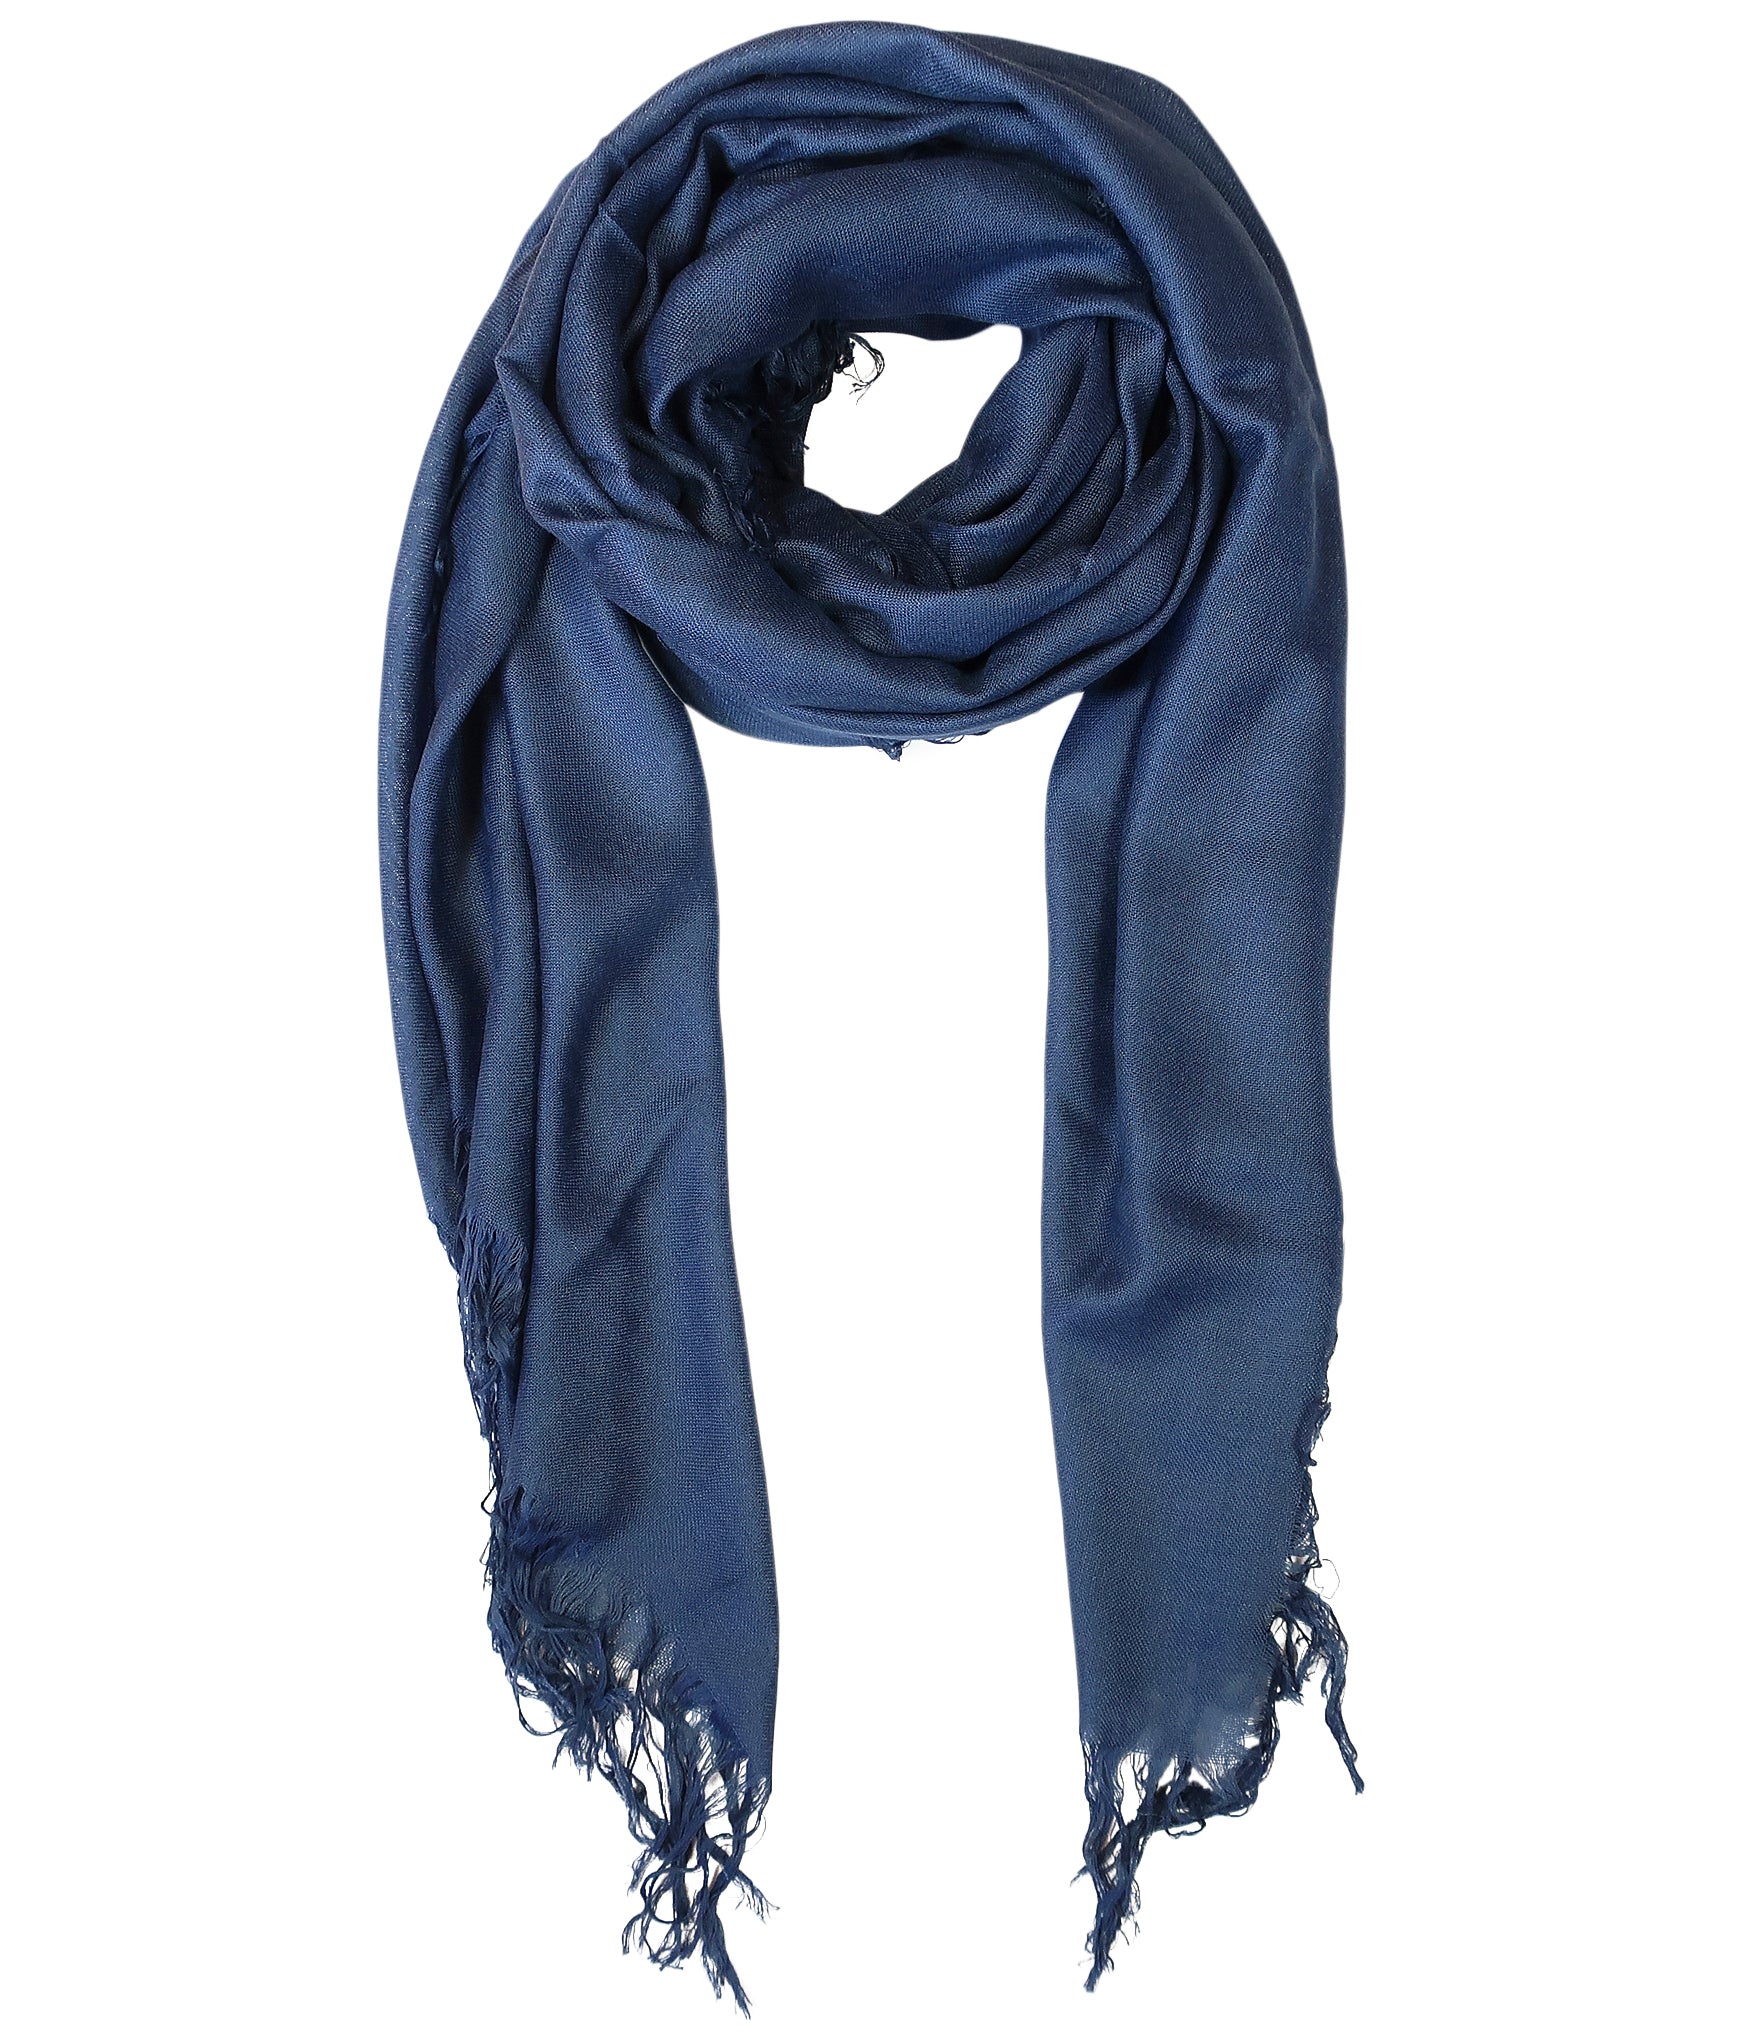 Blue Pacific Tissue Modal and Cashmere Scarf in Denim Blue